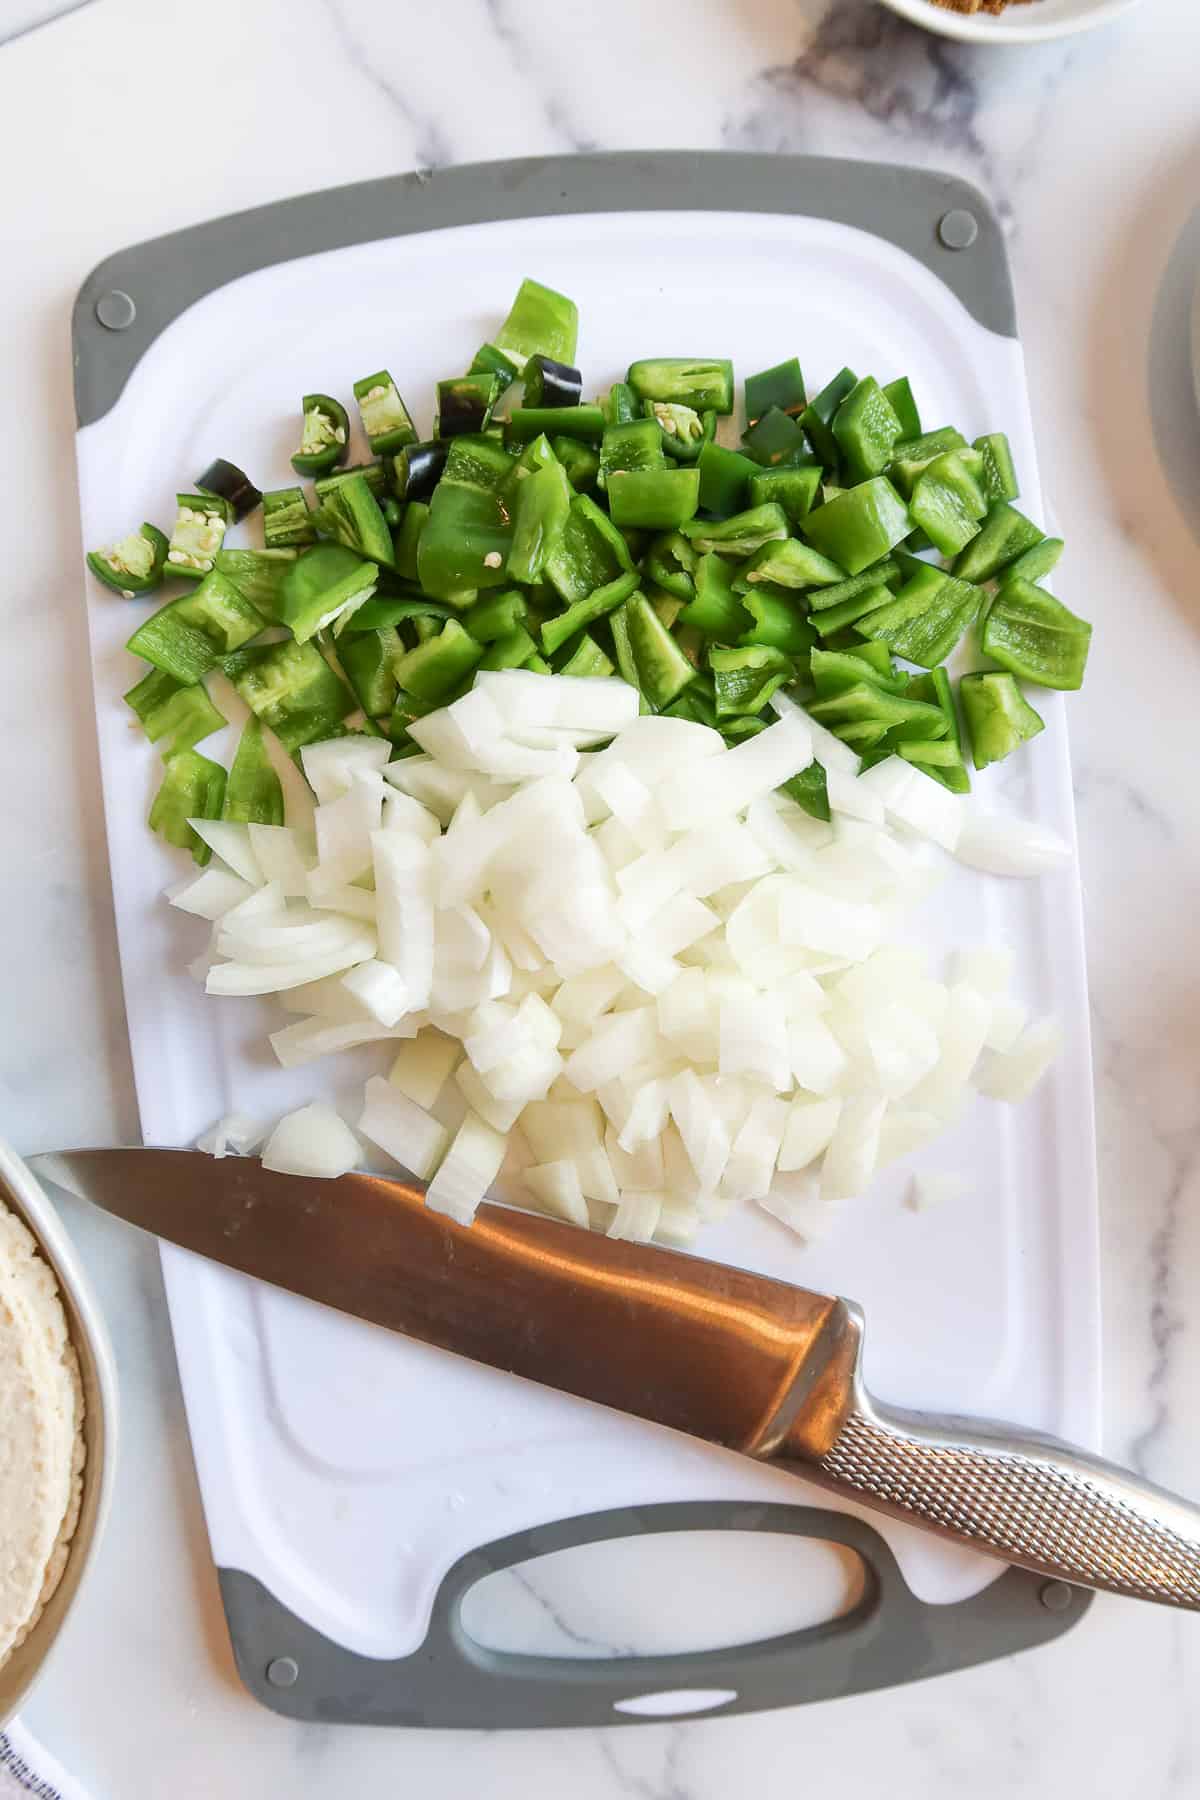 Chopped jalapenos, green bell peppers and white onion on a cutting board.